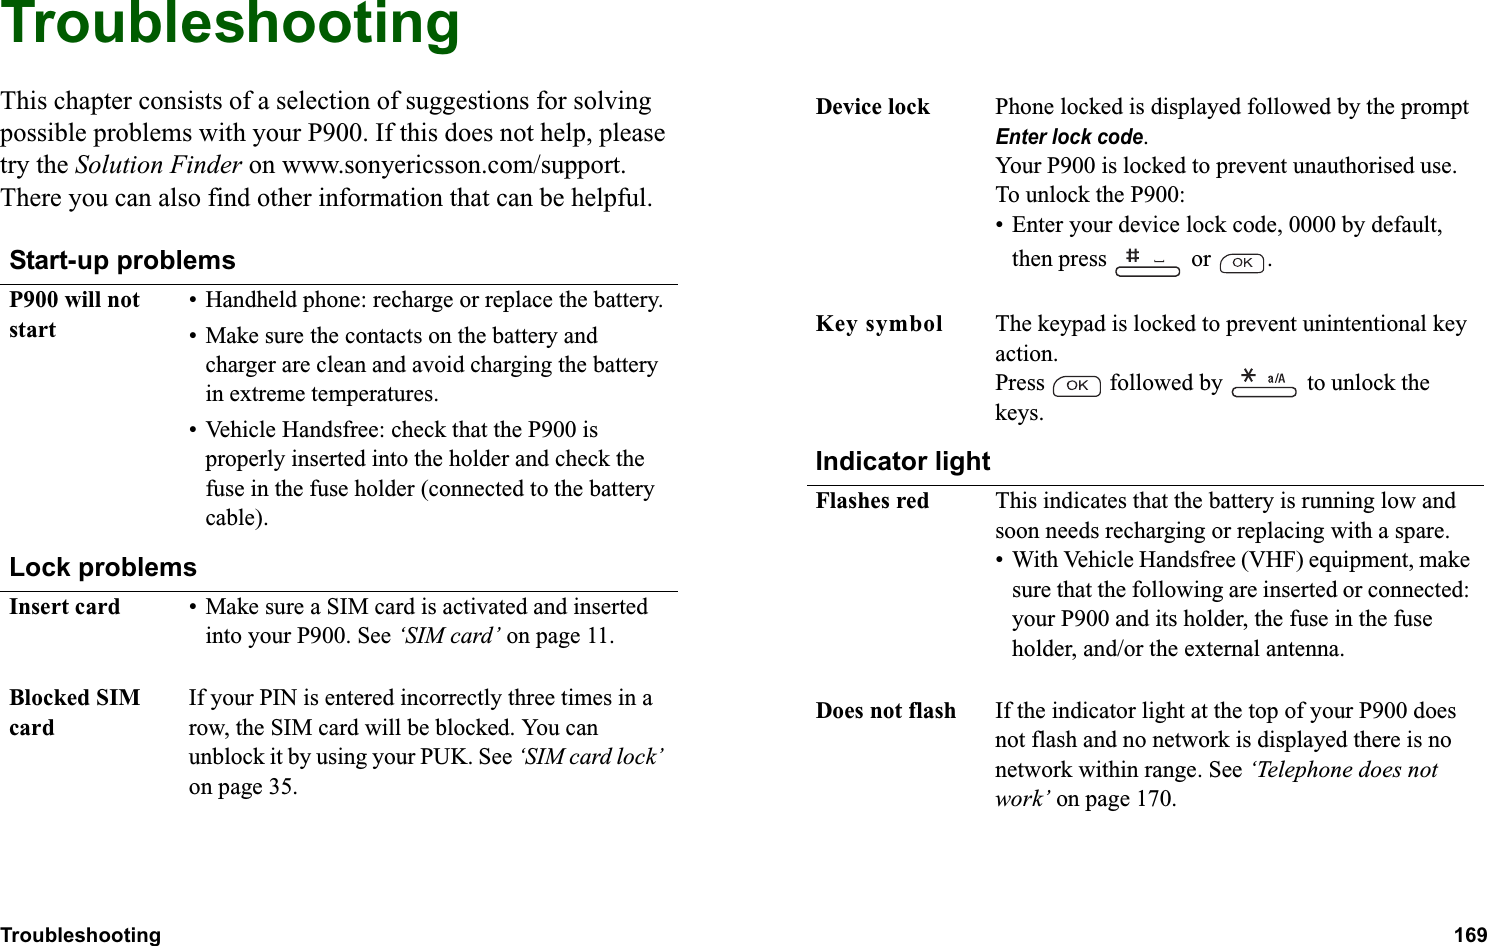 Troubleshooting 169  REFERENCETroubleshootingThis chapter consists of a selection of suggestions for solving possible problems with your P900. If this does not help, please try the Solution Finder on www.sonyericsson.com/support. There you can also find other information that can be helpful. Start-up problemsP900 will not start• Handheld phone: recharge or replace the battery.• Make sure the contacts on the battery and charger are clean and avoid charging the battery in extreme temperatures.• Vehicle Handsfree: check that the P900 is properly inserted into the holder and check the fuse in the fuse holder (connected to the battery cable).Lock problemsInsert card • Make sure a SIM card is activated and inserted into your P900. See ‘SIM card’ on page 11.Blocked SIM cardIf your PIN is entered incorrectly three times in a row, the SIM card will be blocked. You can unblock it by using your PUK. See ‘SIM card lock’ on page 35.Device lock Phone locked is displayed followed by the prompt Enter lock code.Your P900 is locked to prevent unauthorised use.To unlock the P900:• Enter your device lock code, 0000 by default, then press   or  .Key symbol The keypad is locked to prevent unintentional key action.Press   followed by   to unlock the keys.Indicator lightFlashes red This indicates that the battery is running low and soon needs recharging or replacing with a spare.• With Vehicle Handsfree (VHF) equipment, make sure that the following are inserted or connected: your P900 and its holder, the fuse in the fuse holder, and/or the external antenna.Does not flash If the indicator light at the top of your P900 does not flash and no network is displayed there is no network within range. See ‘Telephone does not work’ on page 170.